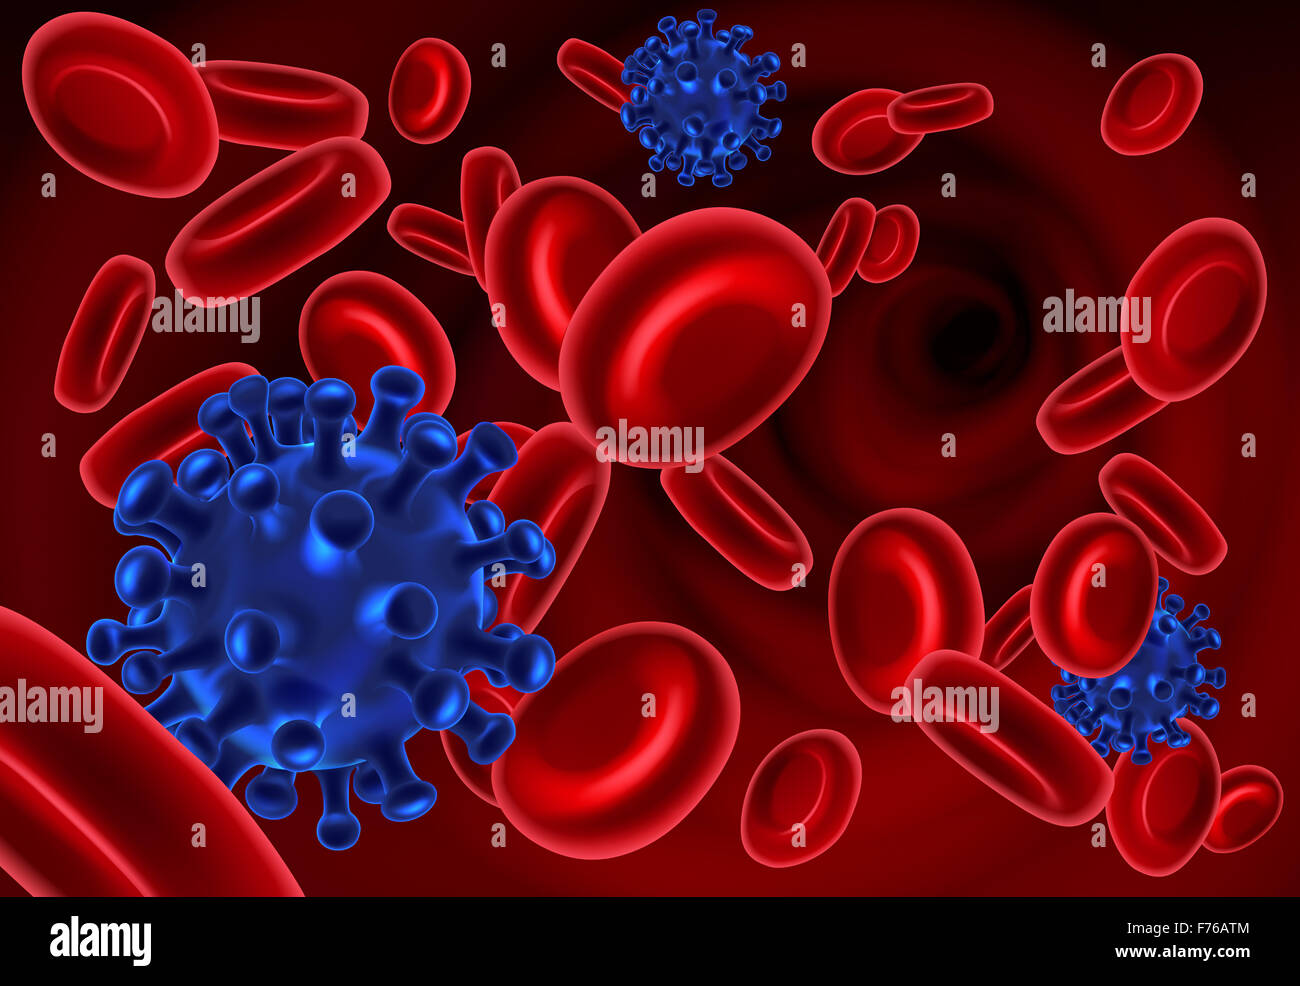 A conceptual illustration of Virus or bacteria and red Blood Cells Stock Photo